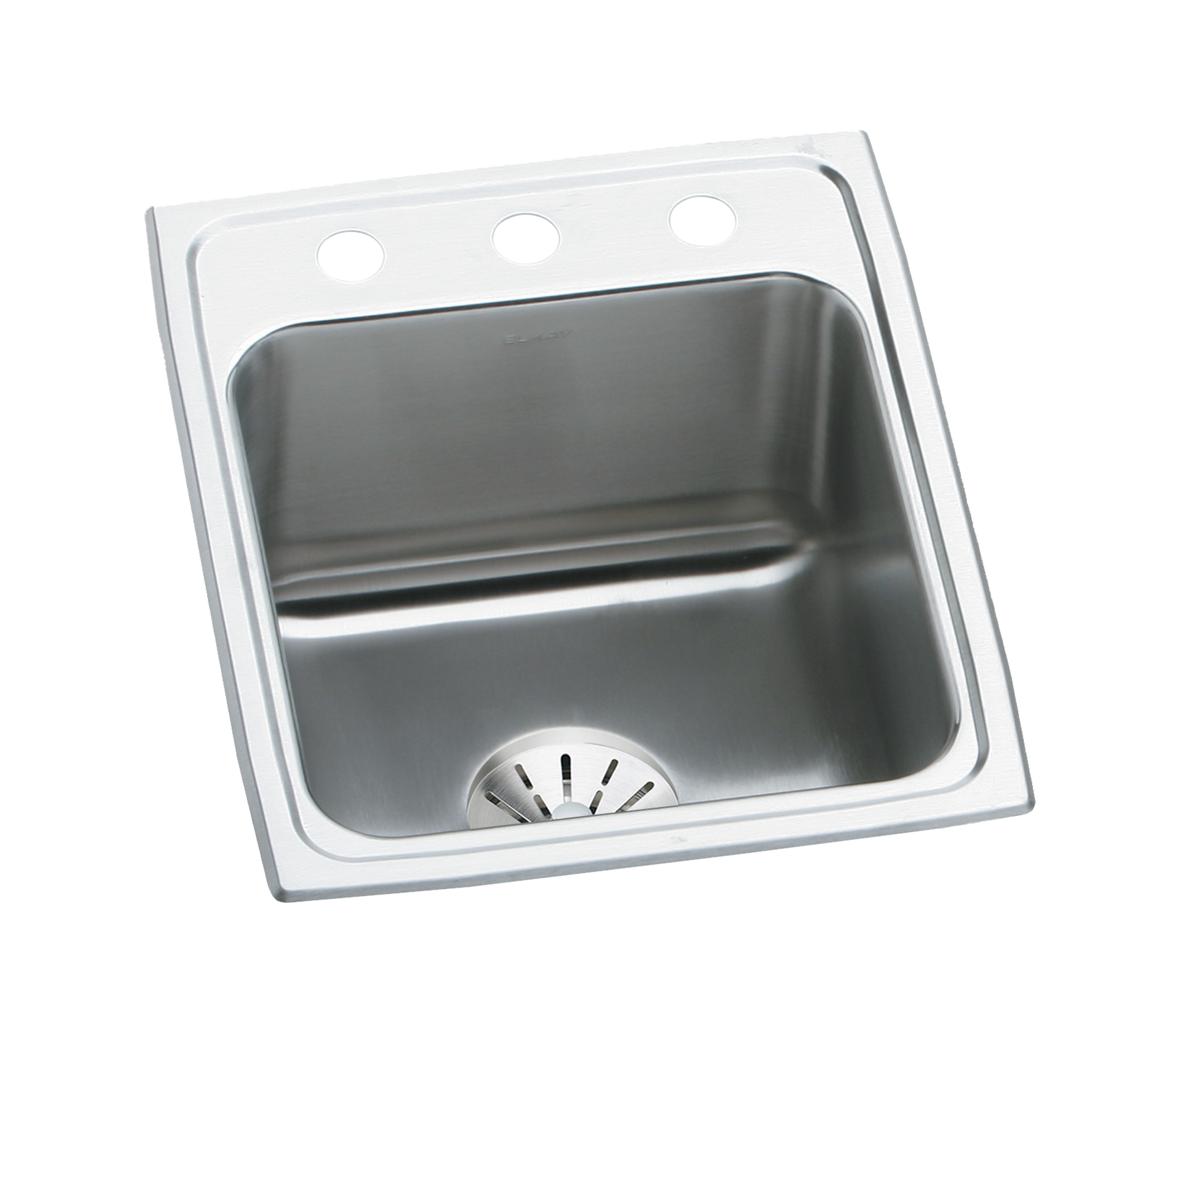 Elkay Lustertone Classic 17" x 22" x 10-1/8" Single Bowl Drop-in Sink with Perfect Drain